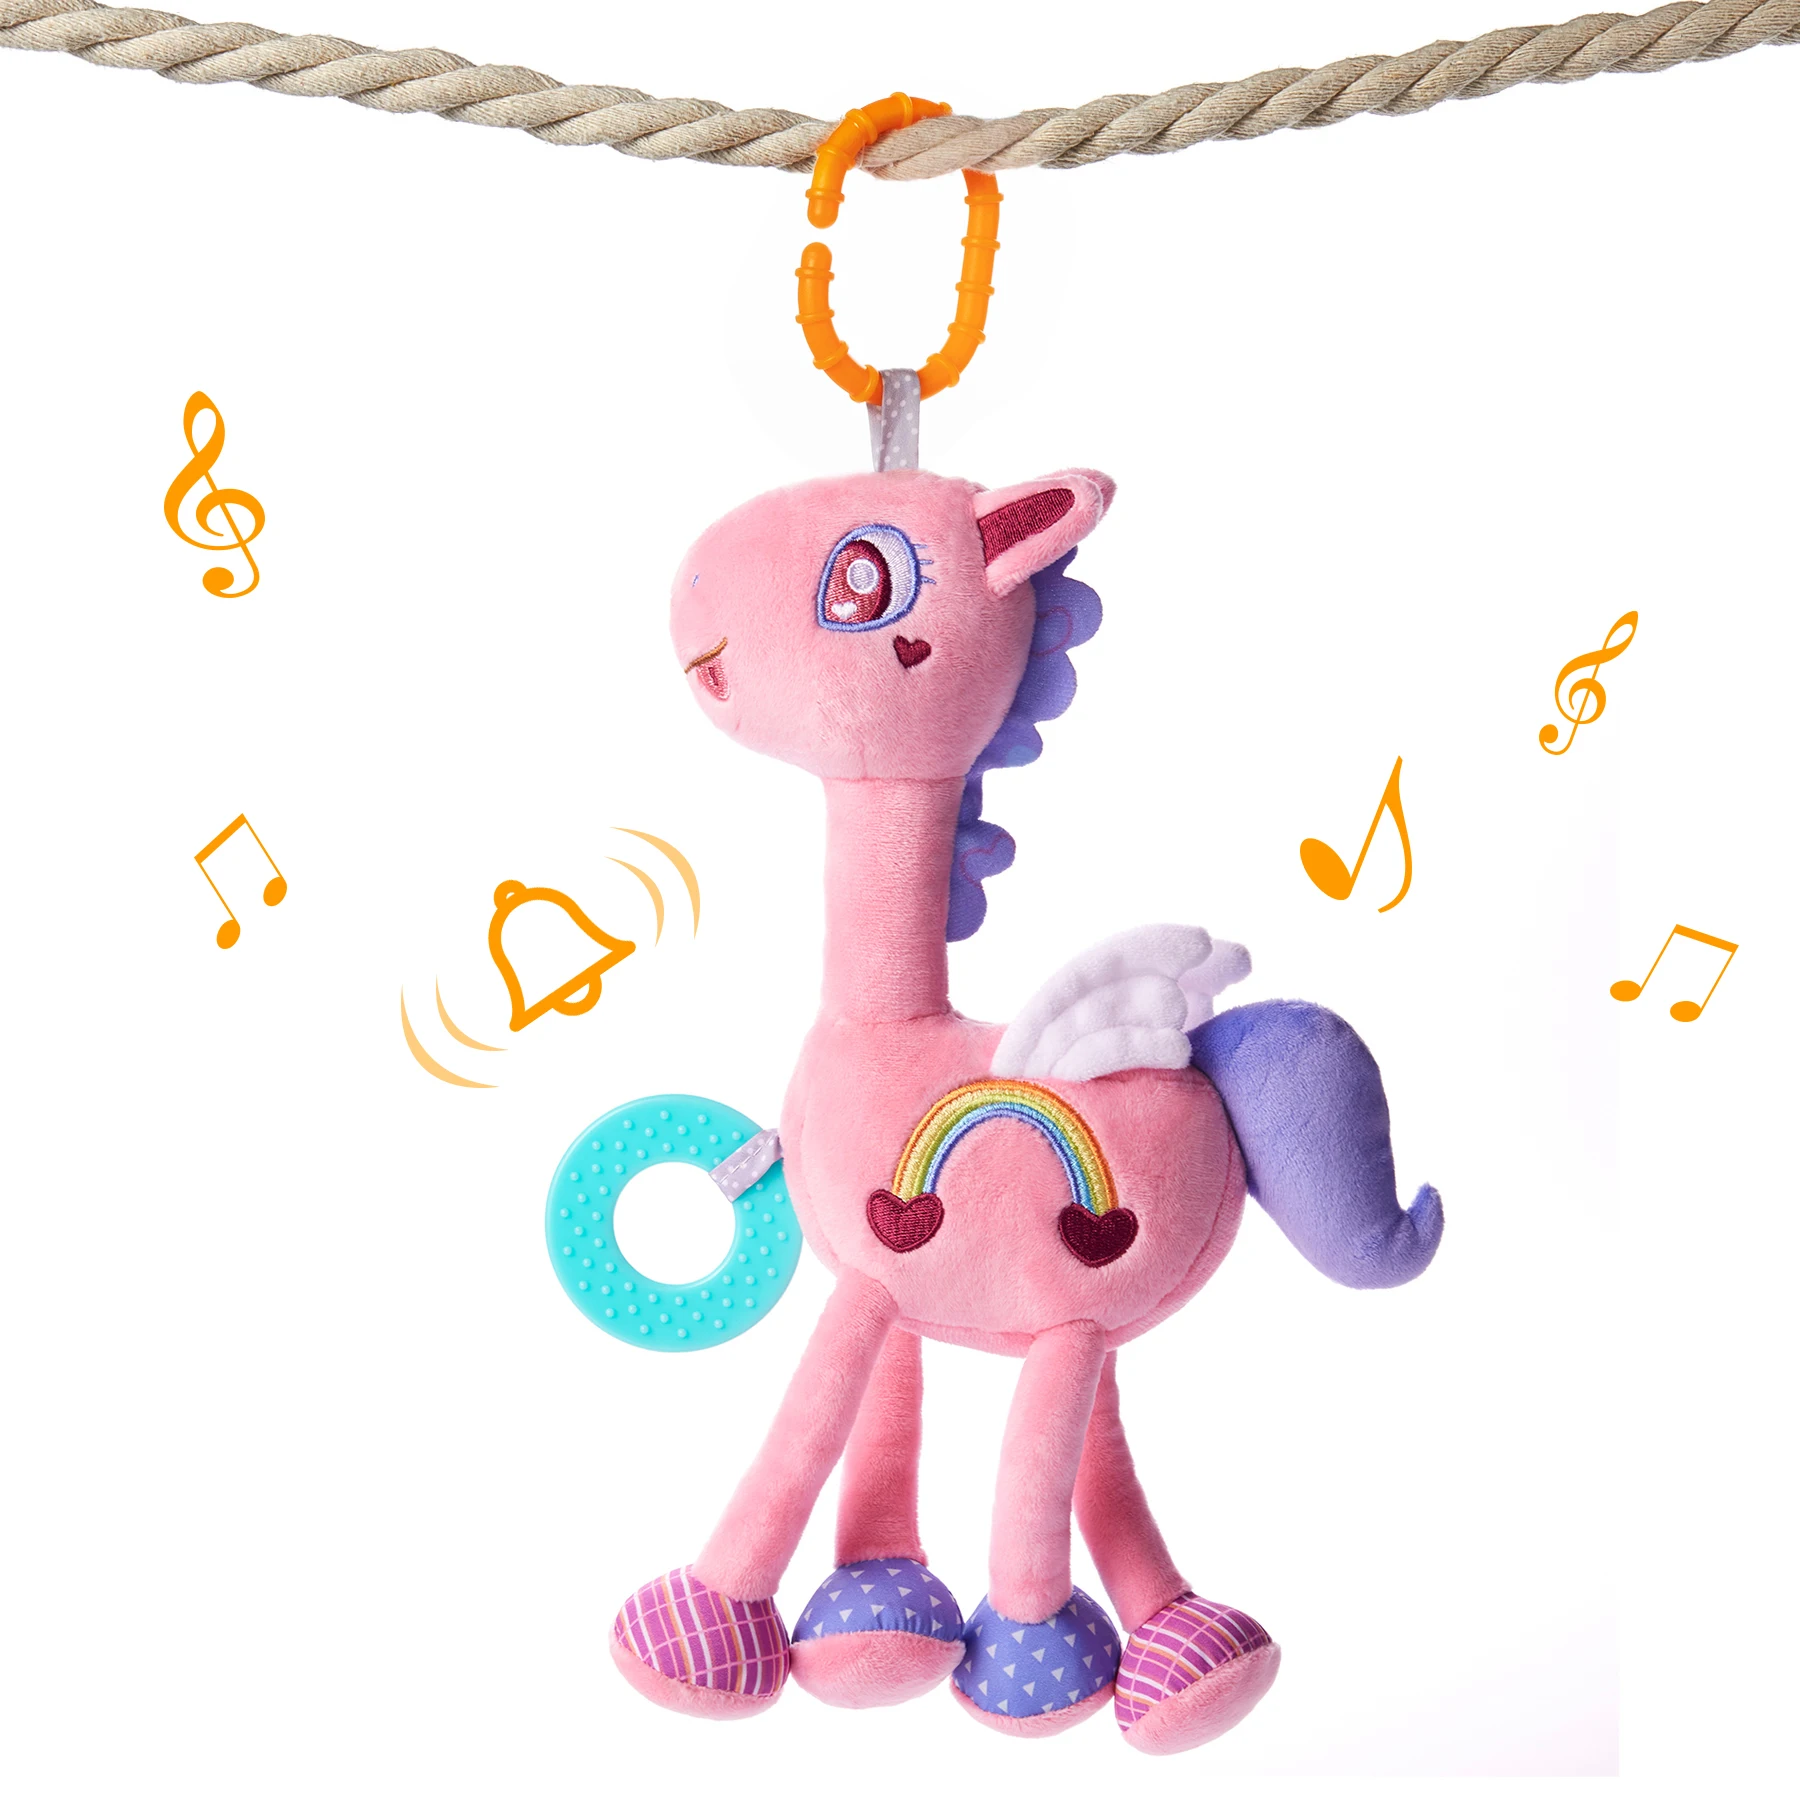 Tumama Kids Pink Unicorn Soft Hanging Rattle Toy Build-in Bell Plush Crib Toys Car Seat Baby Stroller Hanging Toy for Infants